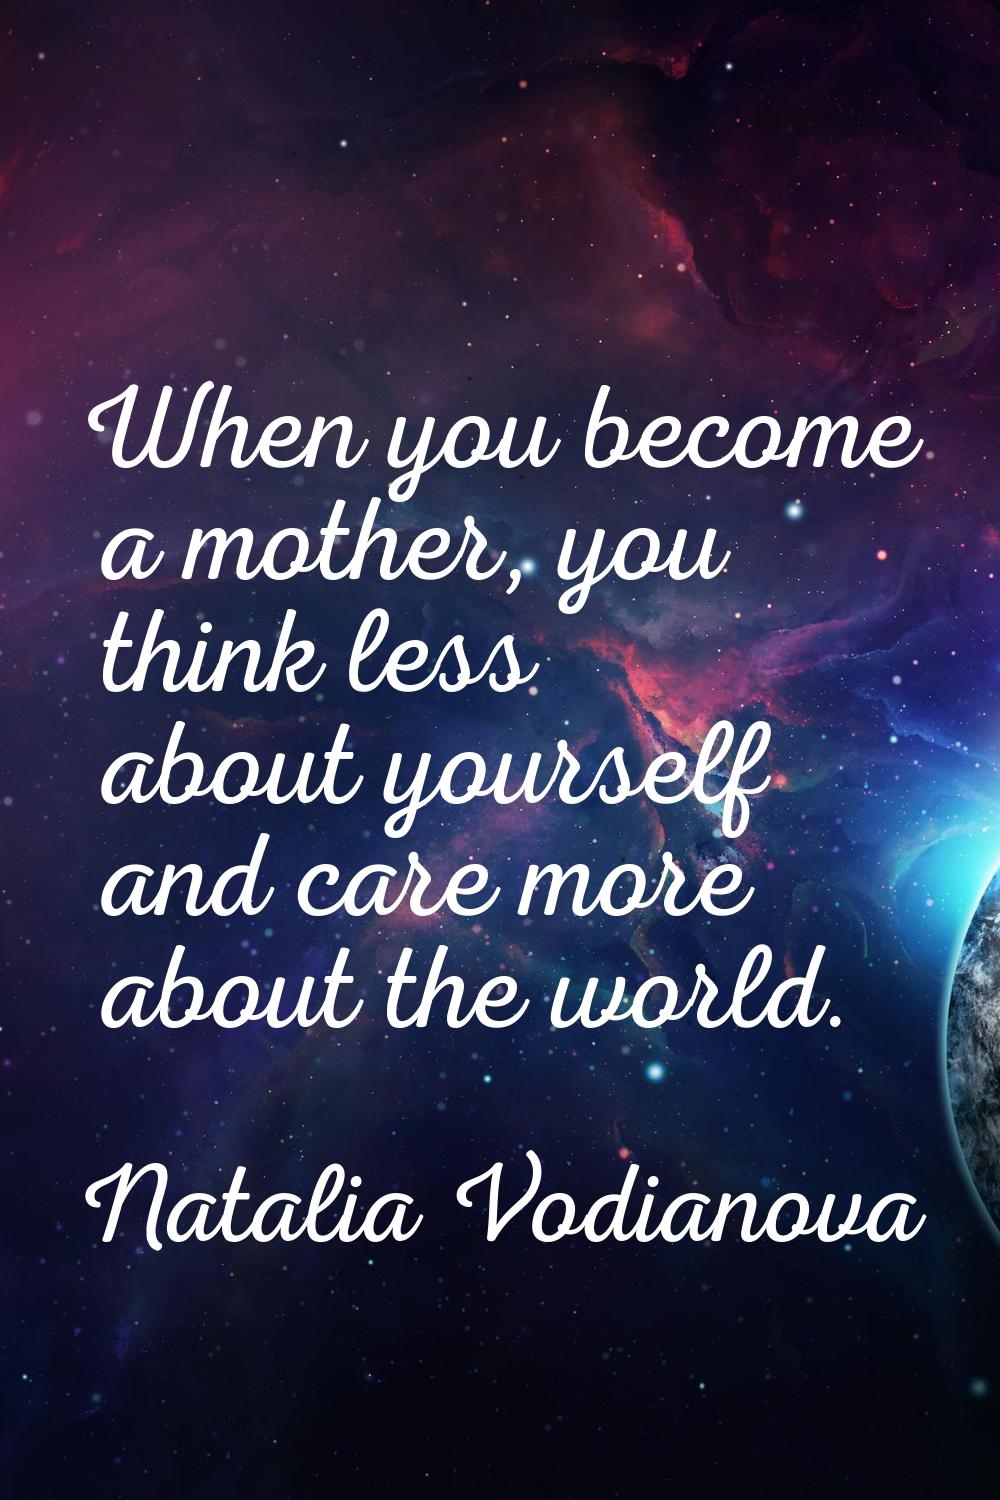 When you become a mother, you think less about yourself and care more about the world.